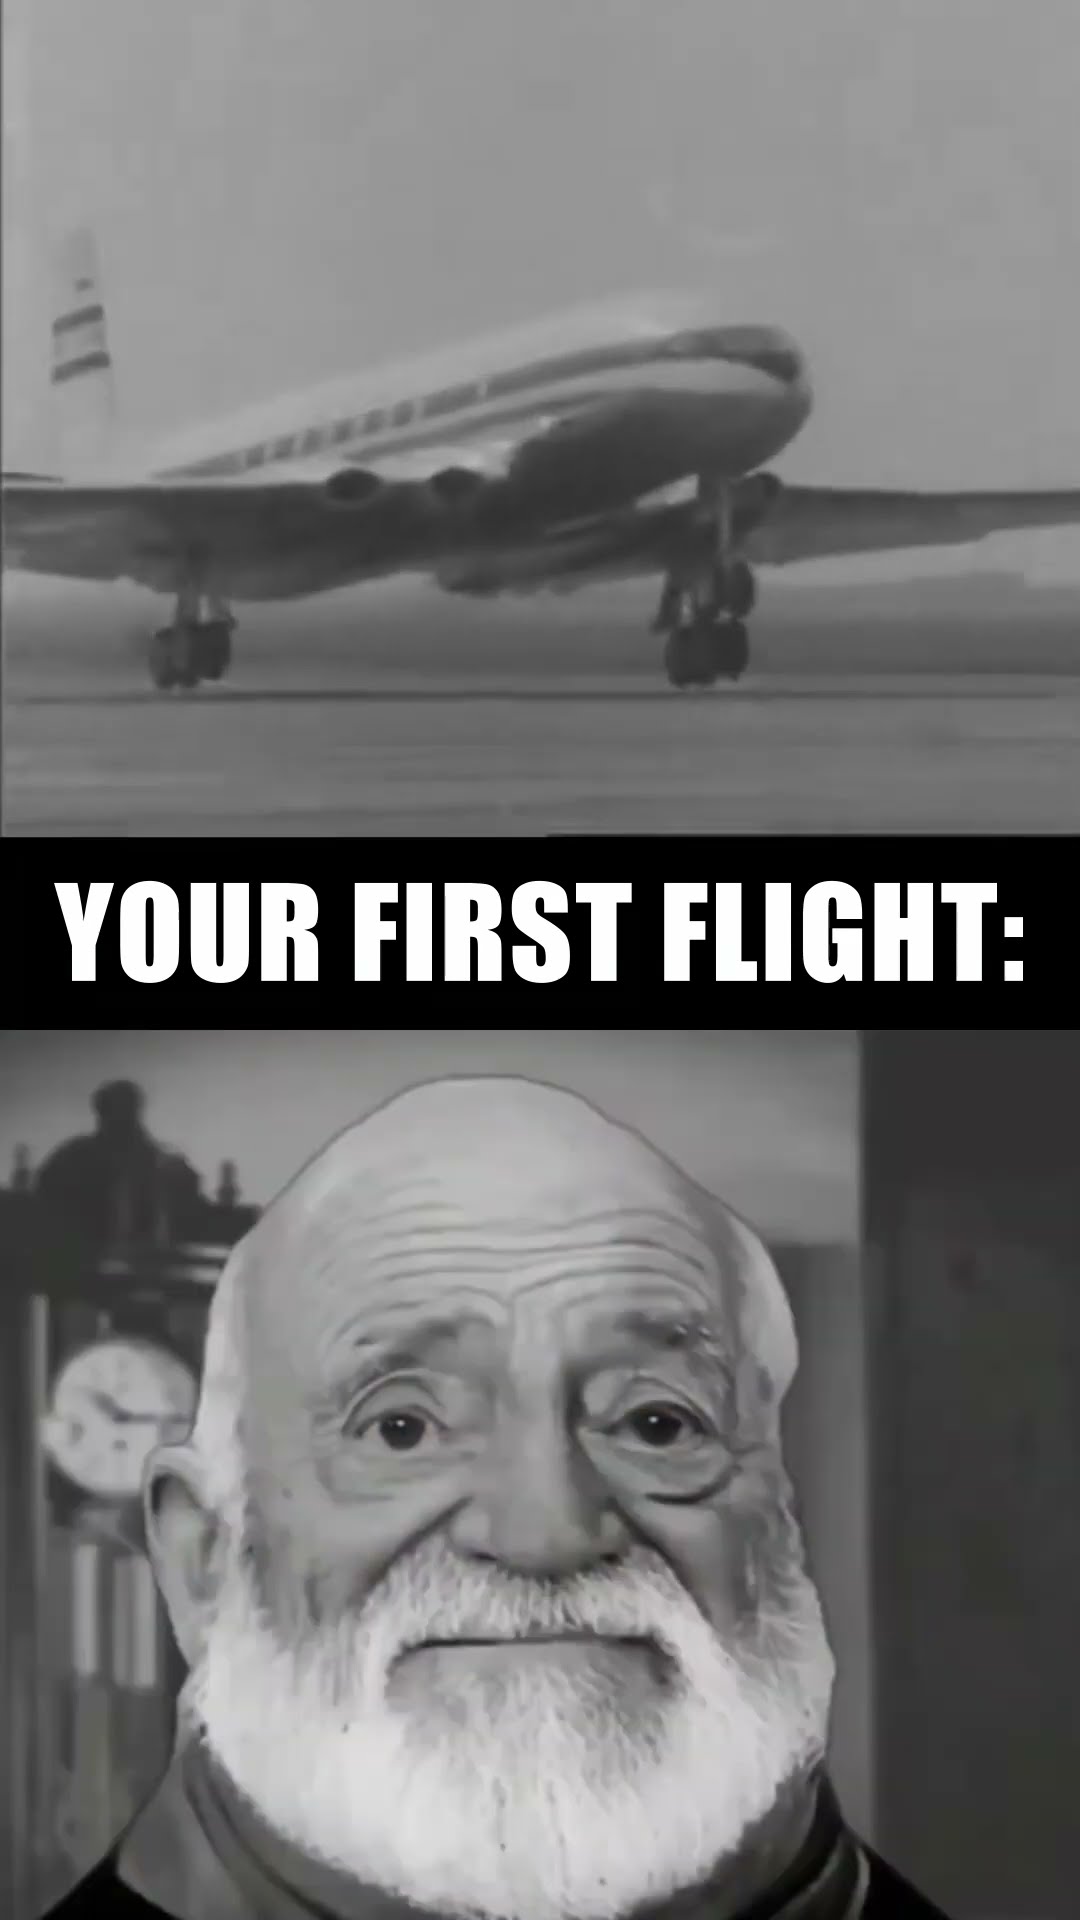 POV: your first flight depending on your age